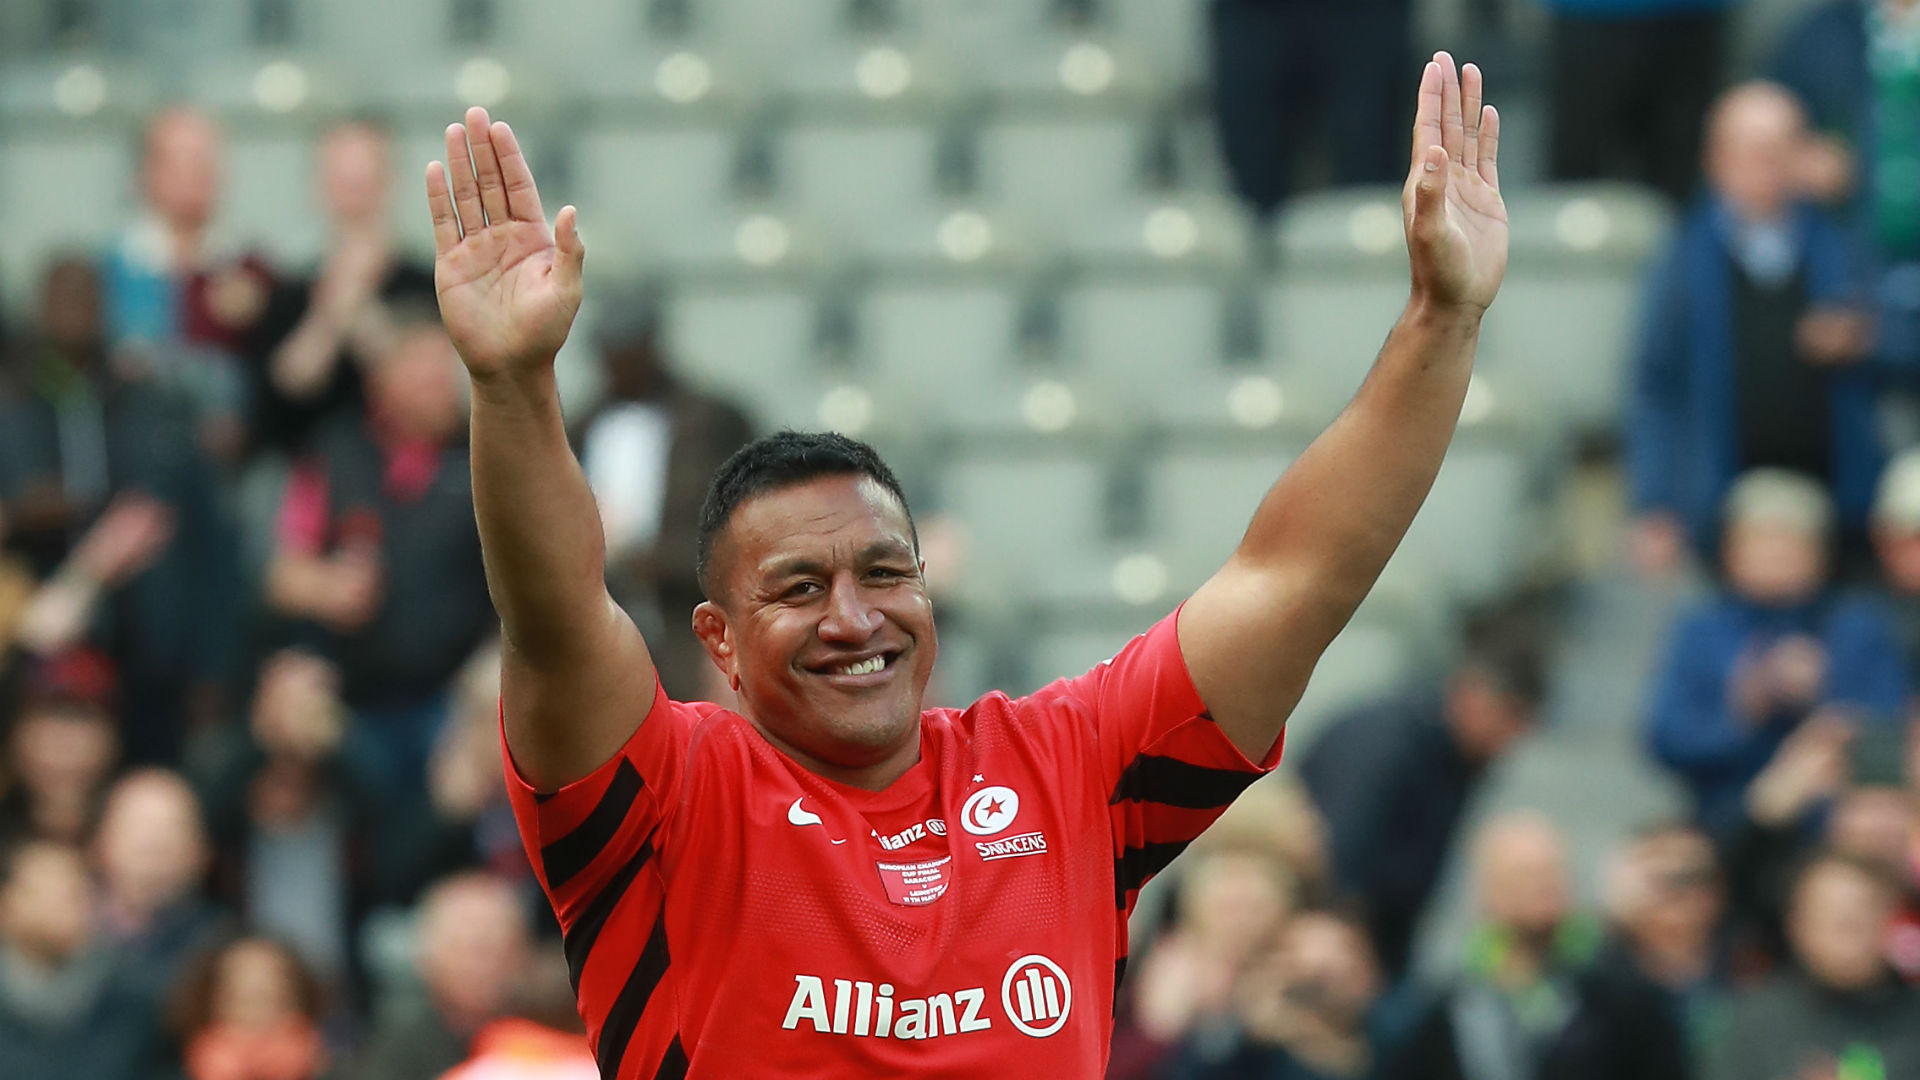 Mako Vunipola's season is over after he suffered a torn hamstring in the European Champions Cup win over Leinster.